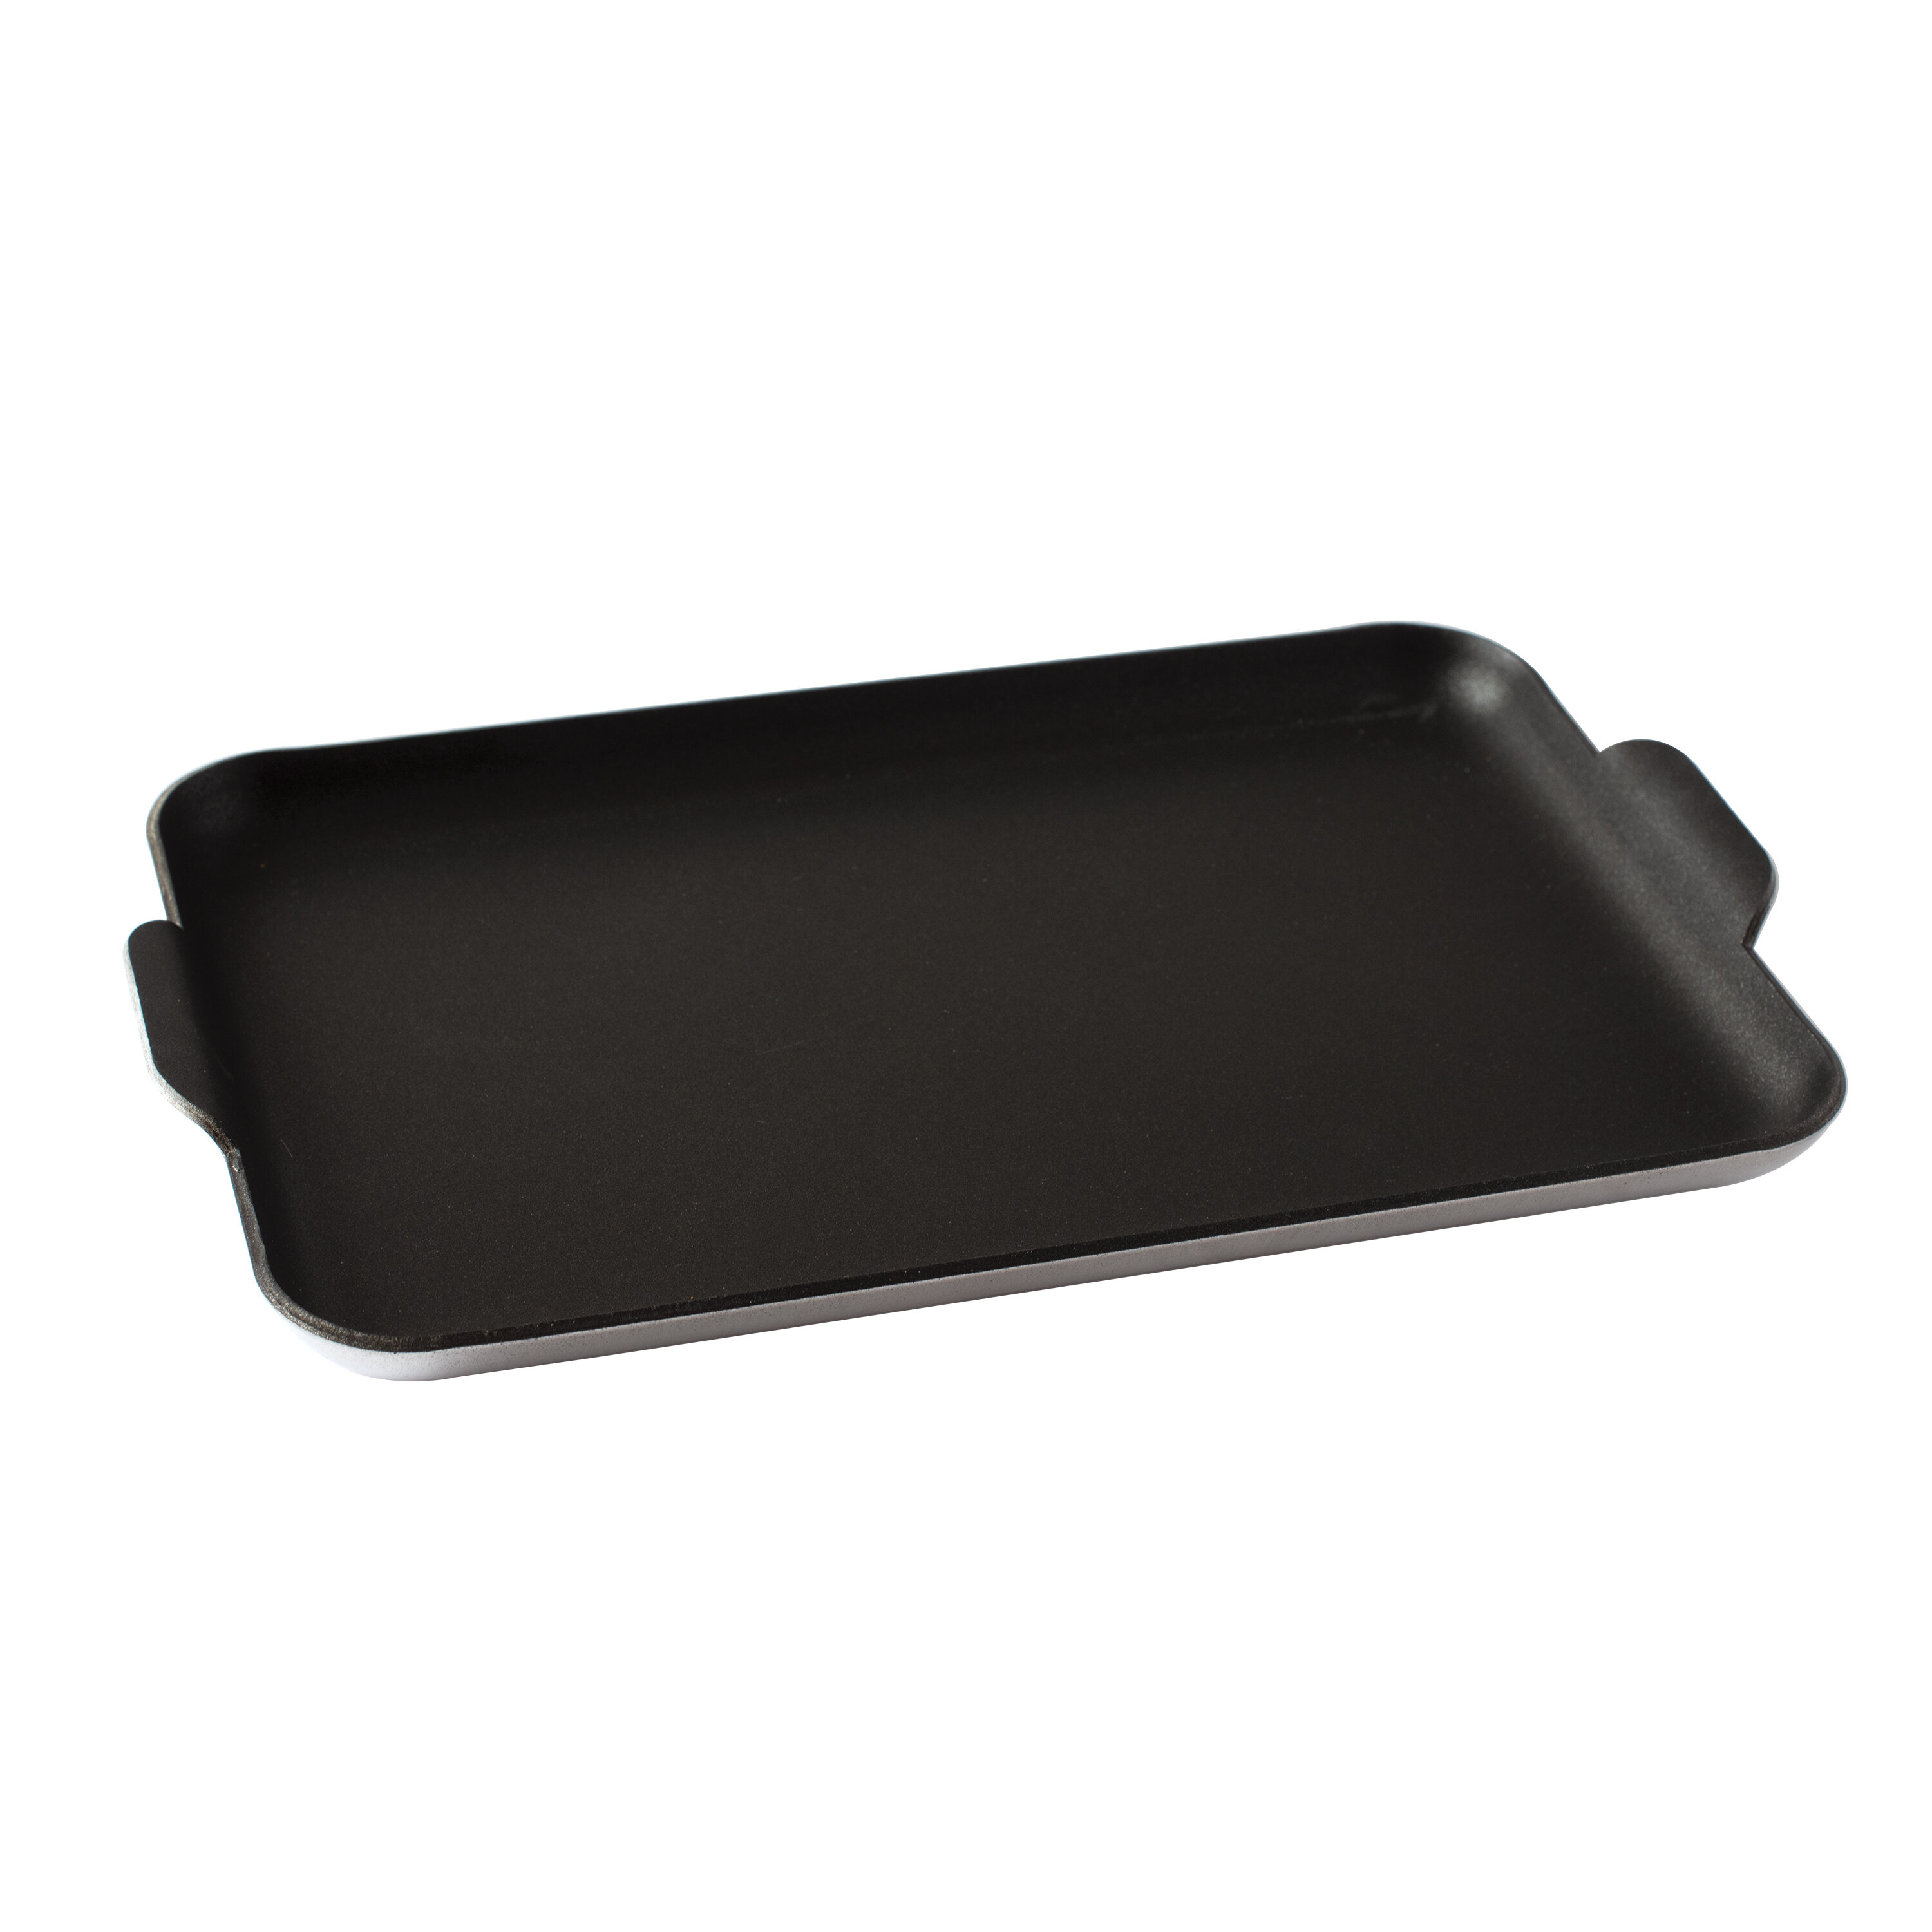  Nordic Ware Professional Weight Searing Grill Pan Gray, 11  Inch: Nordic Ware Griddles: Home & Kitchen